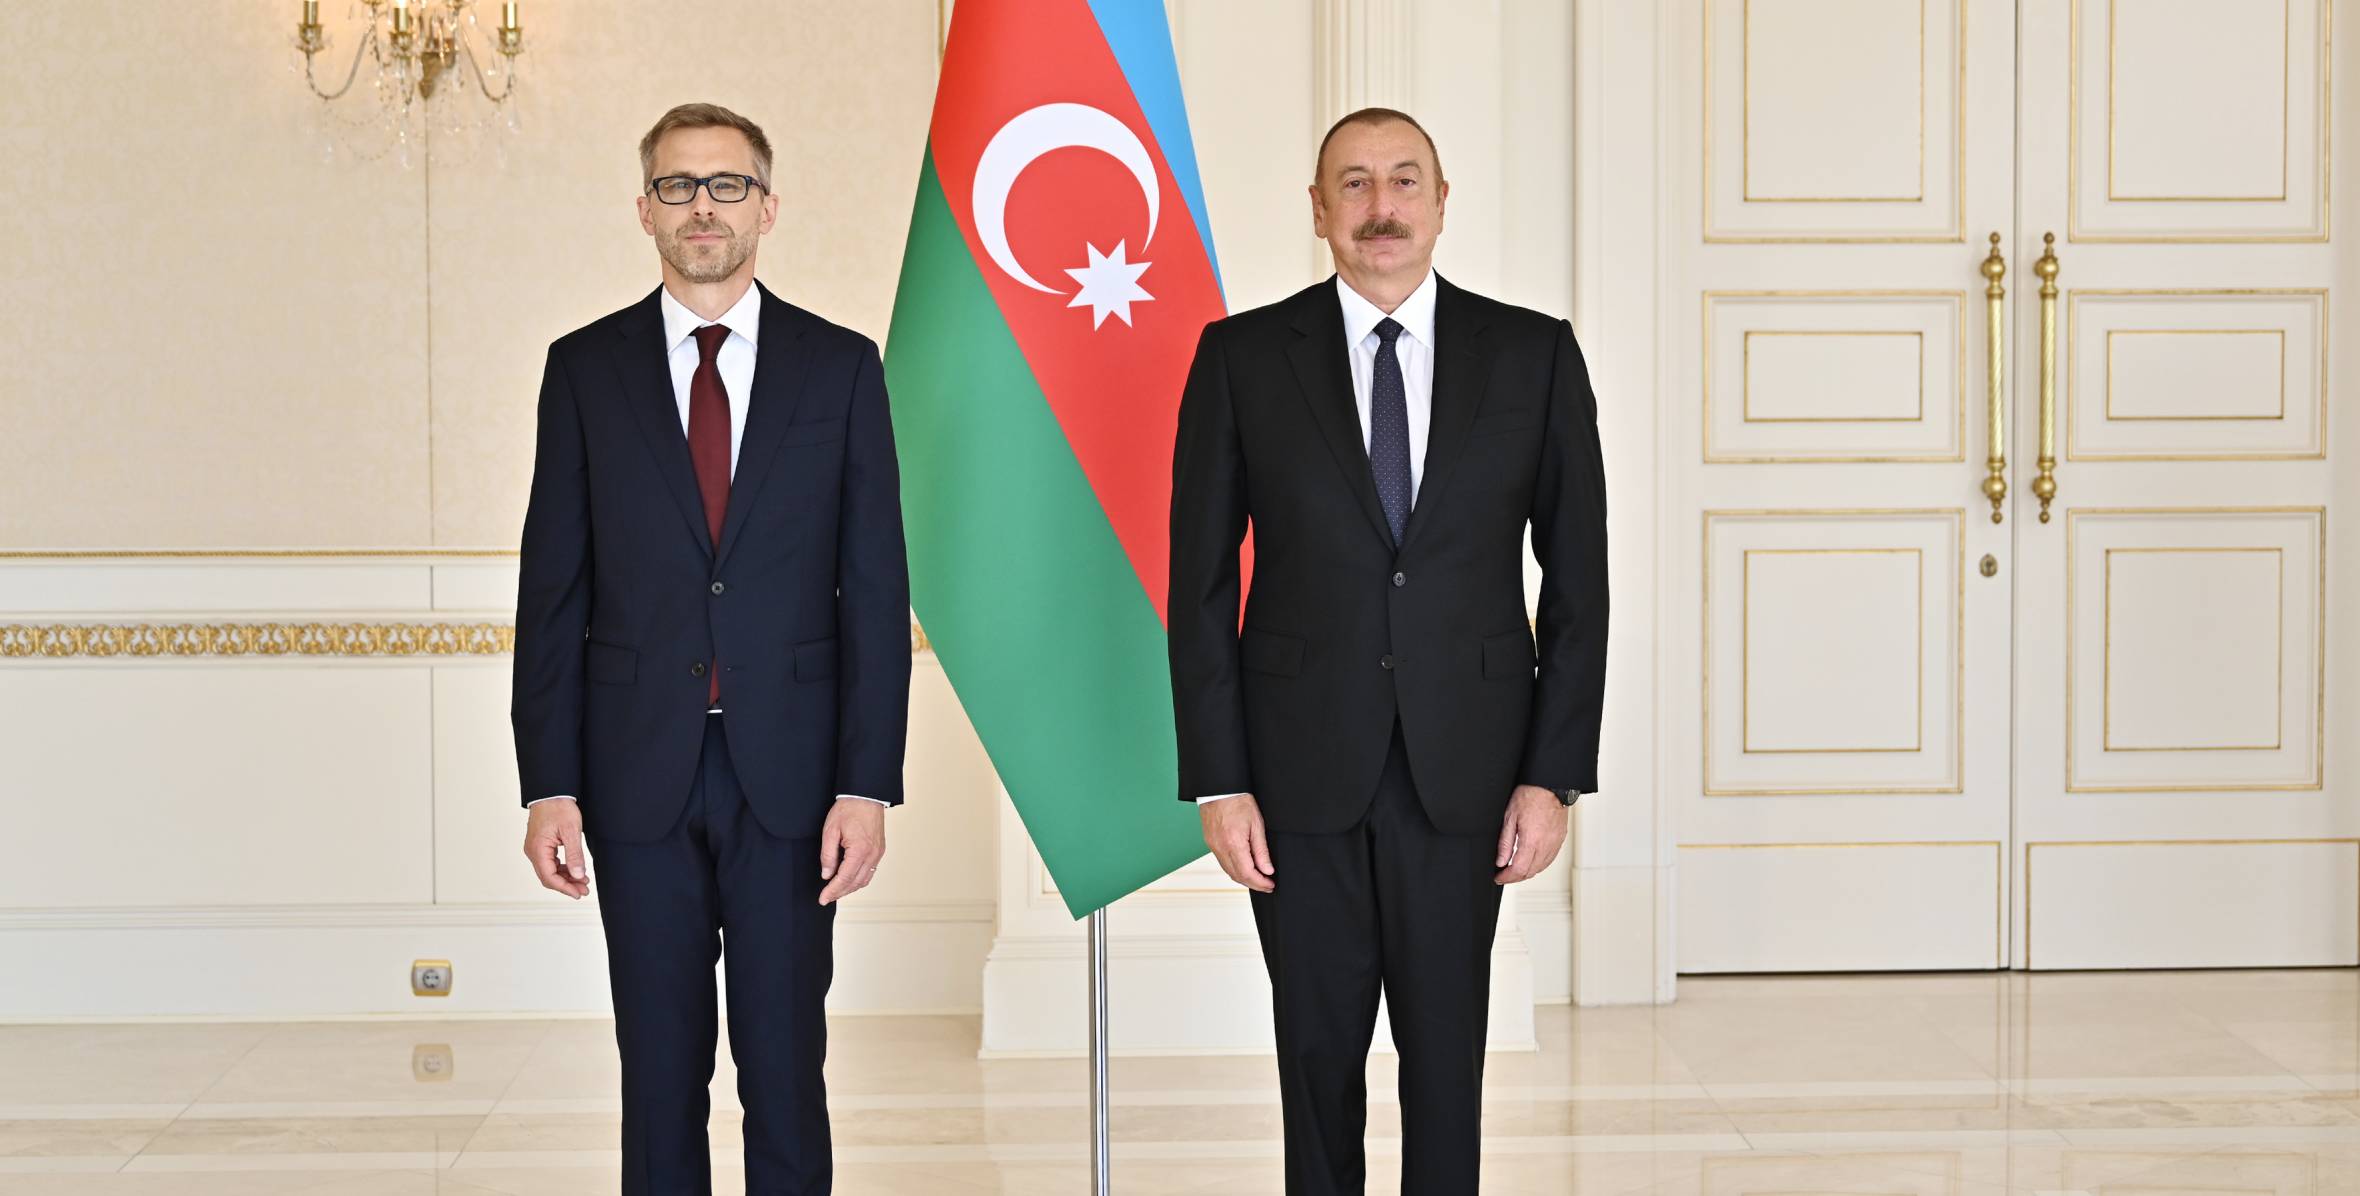 Ilham Aliyev accepted credentials of incoming ambassador of Sweden